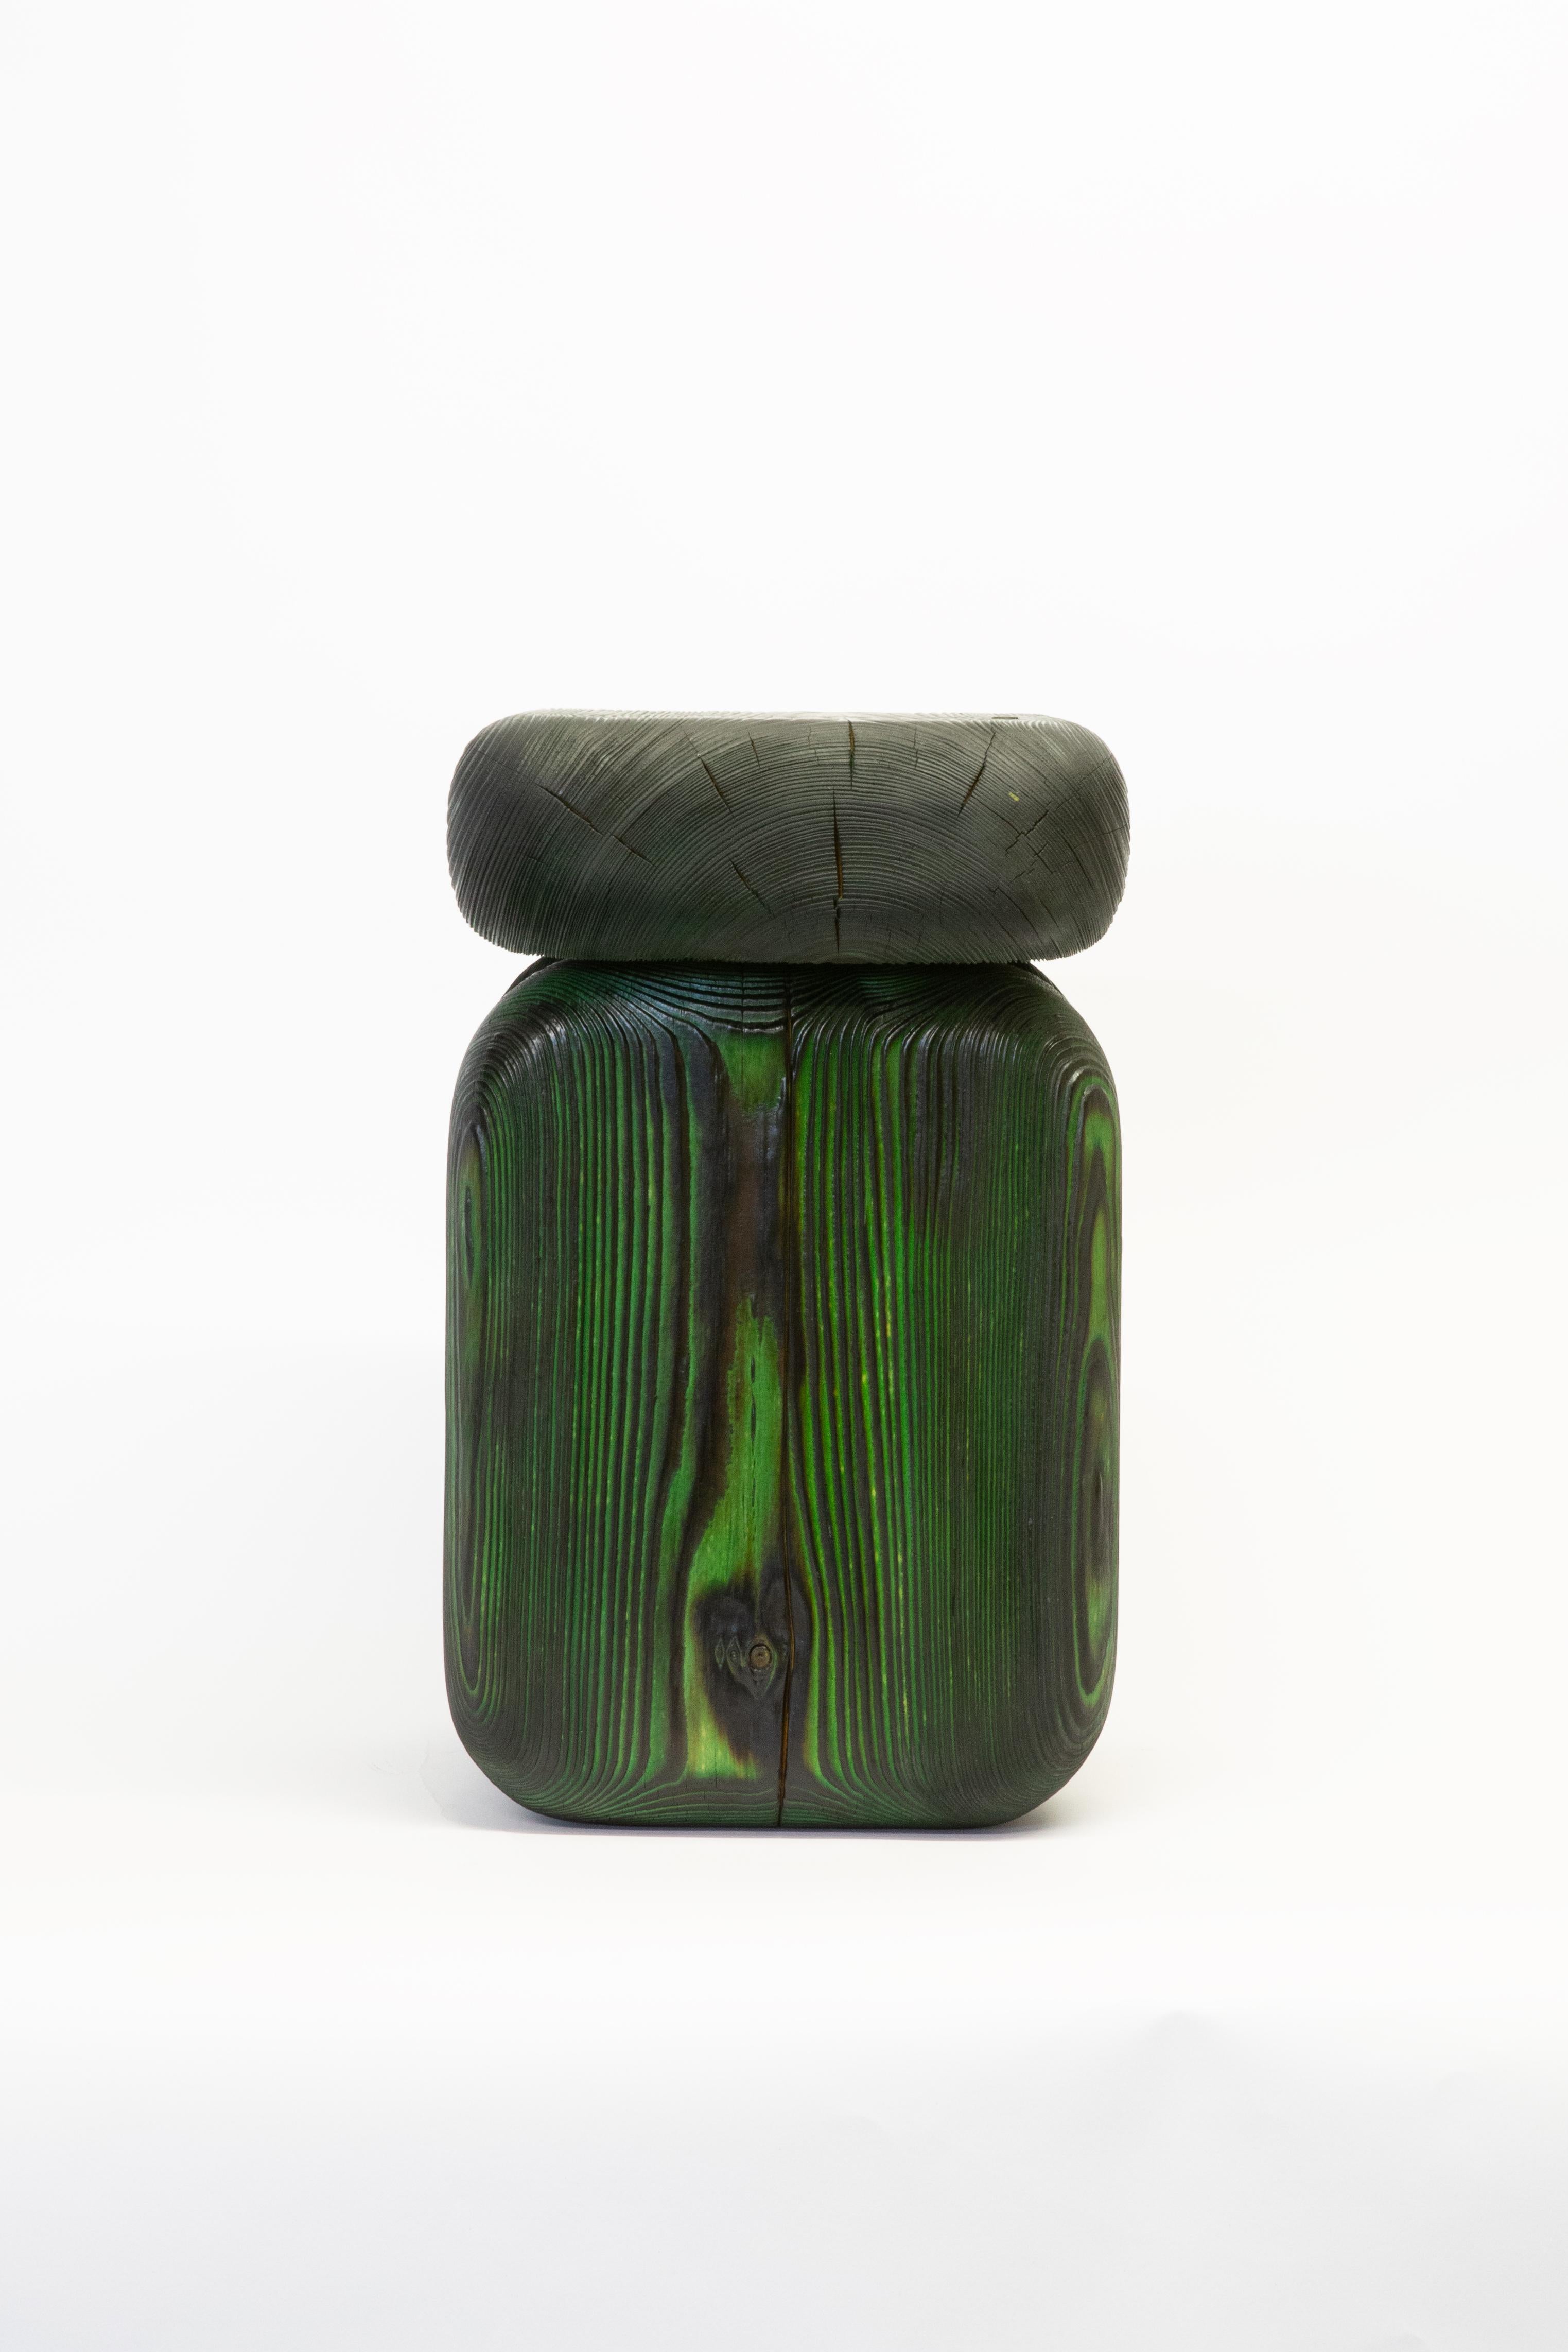 German Contemporary and Tangible Burned and dyed Spruce Wooden Stool by Lisa Ertel For Sale